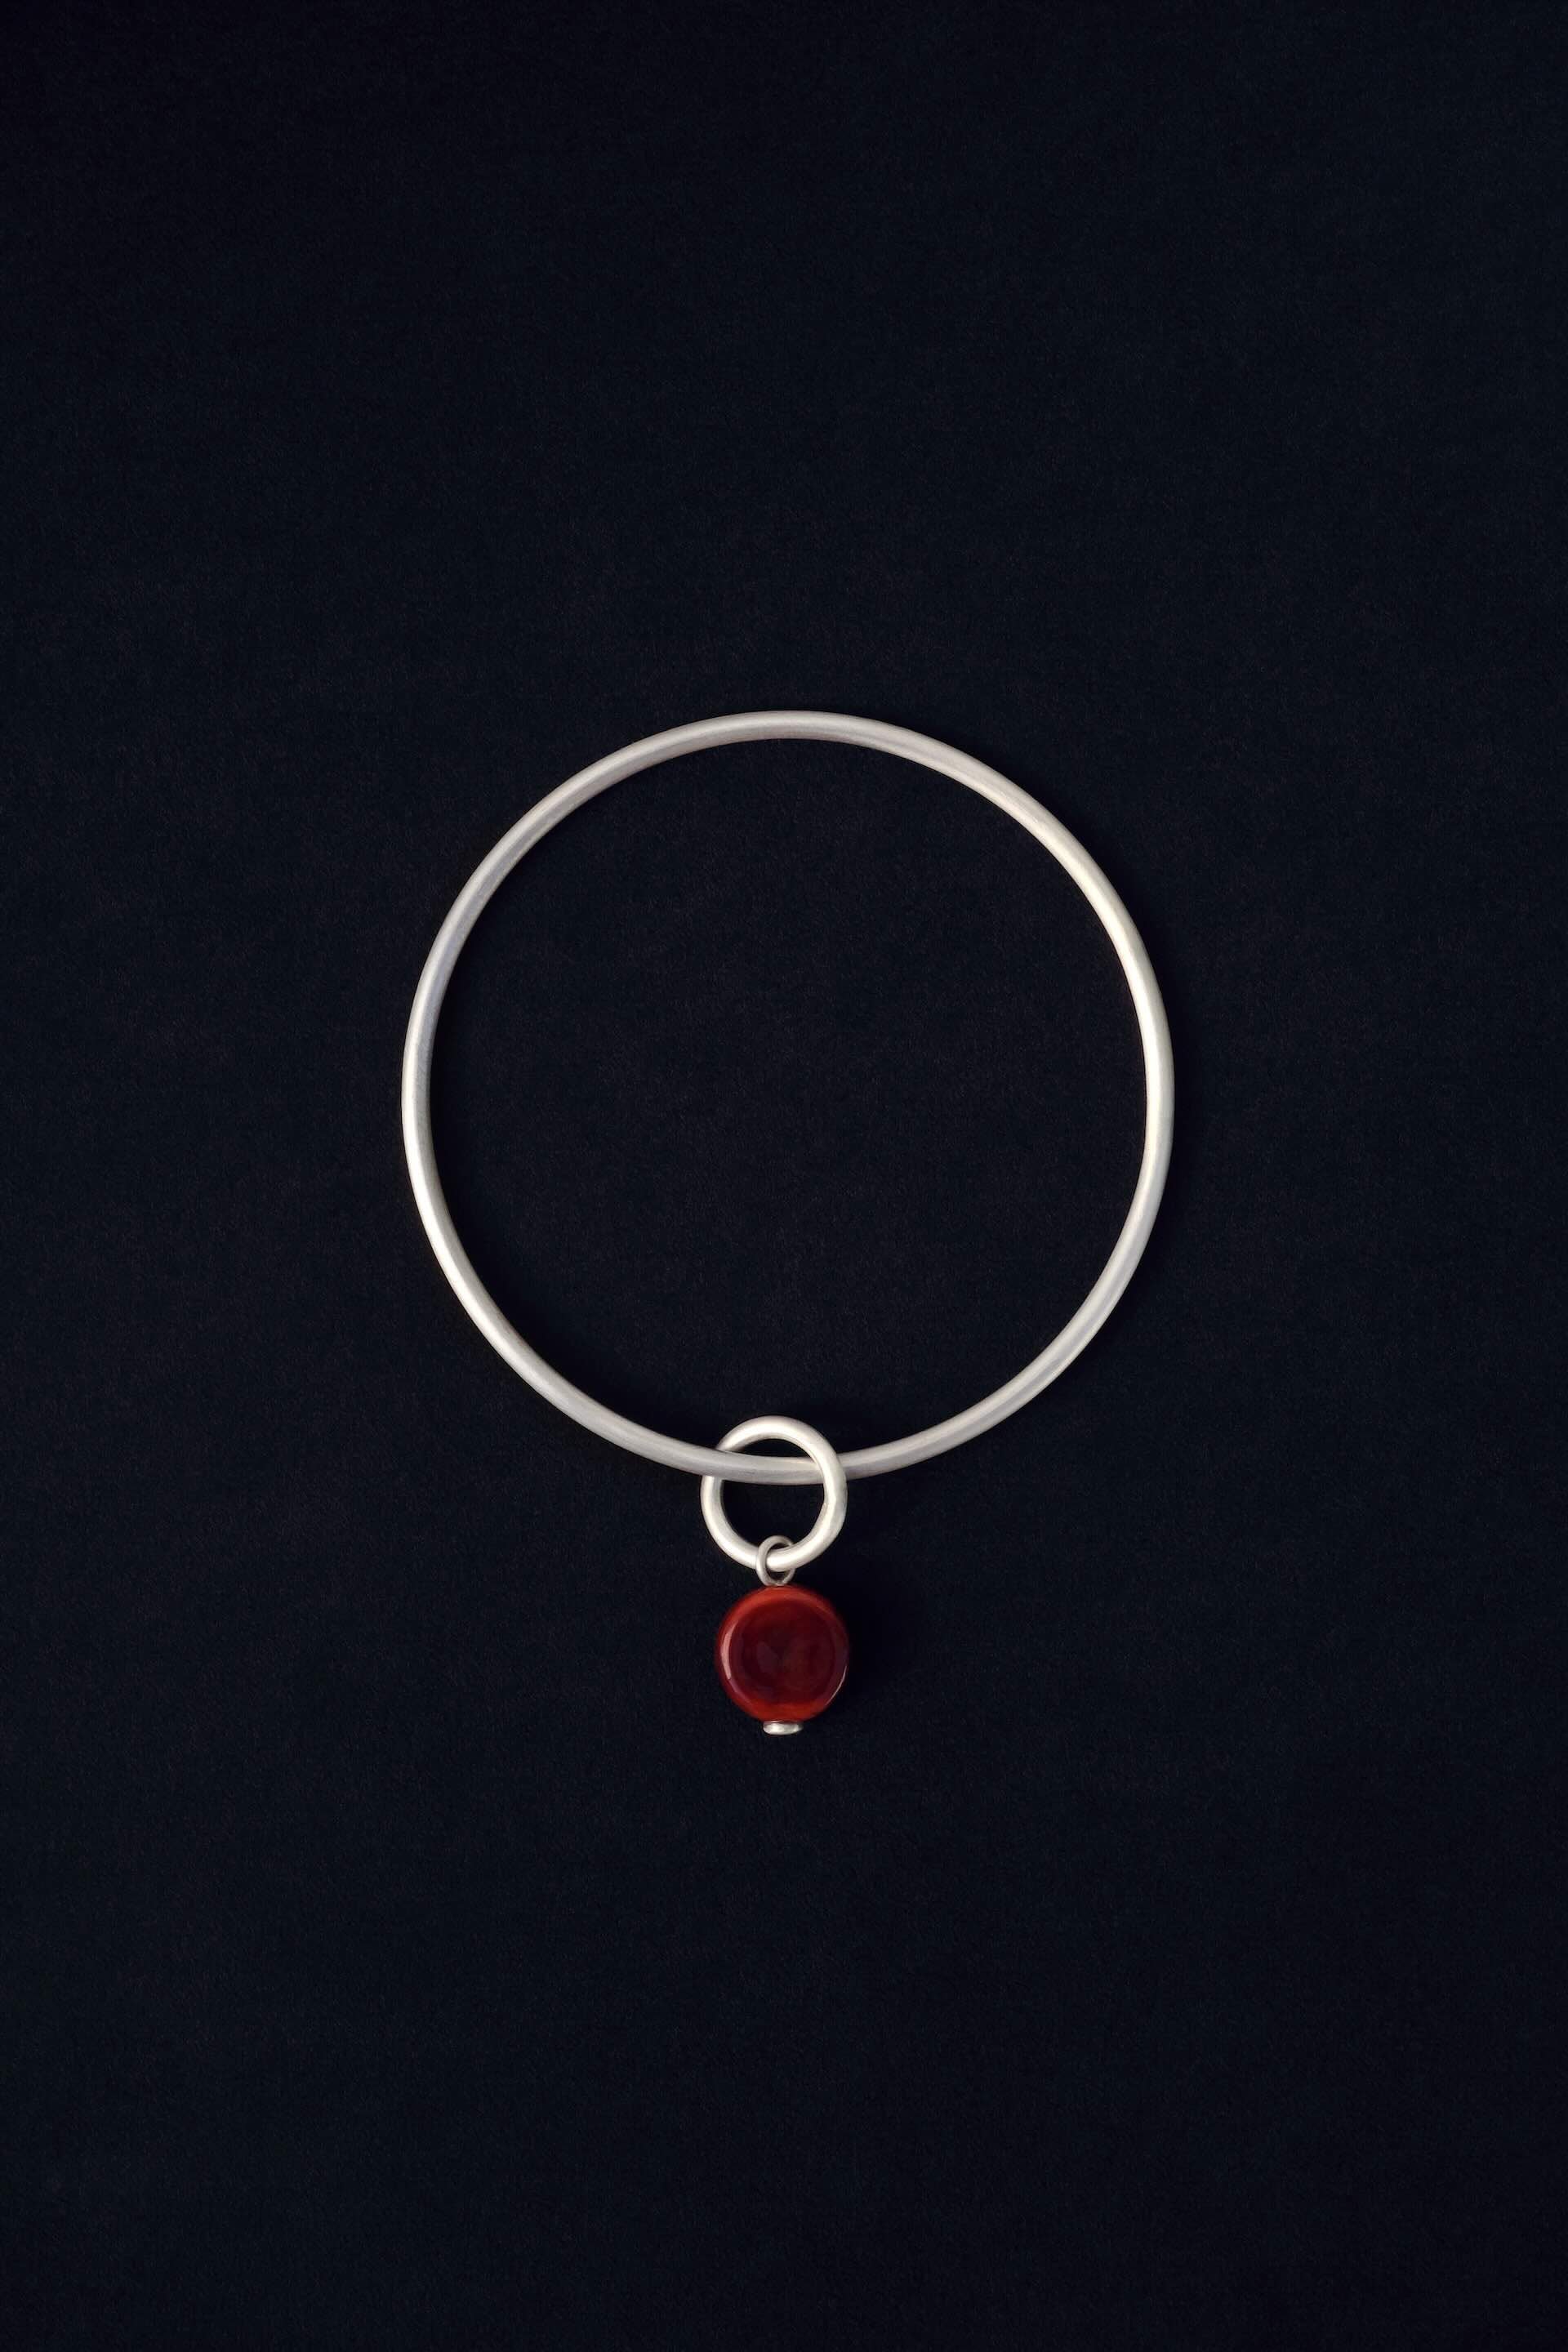 Tiana Marie Combes Glass Bangle in Sterling Silver.